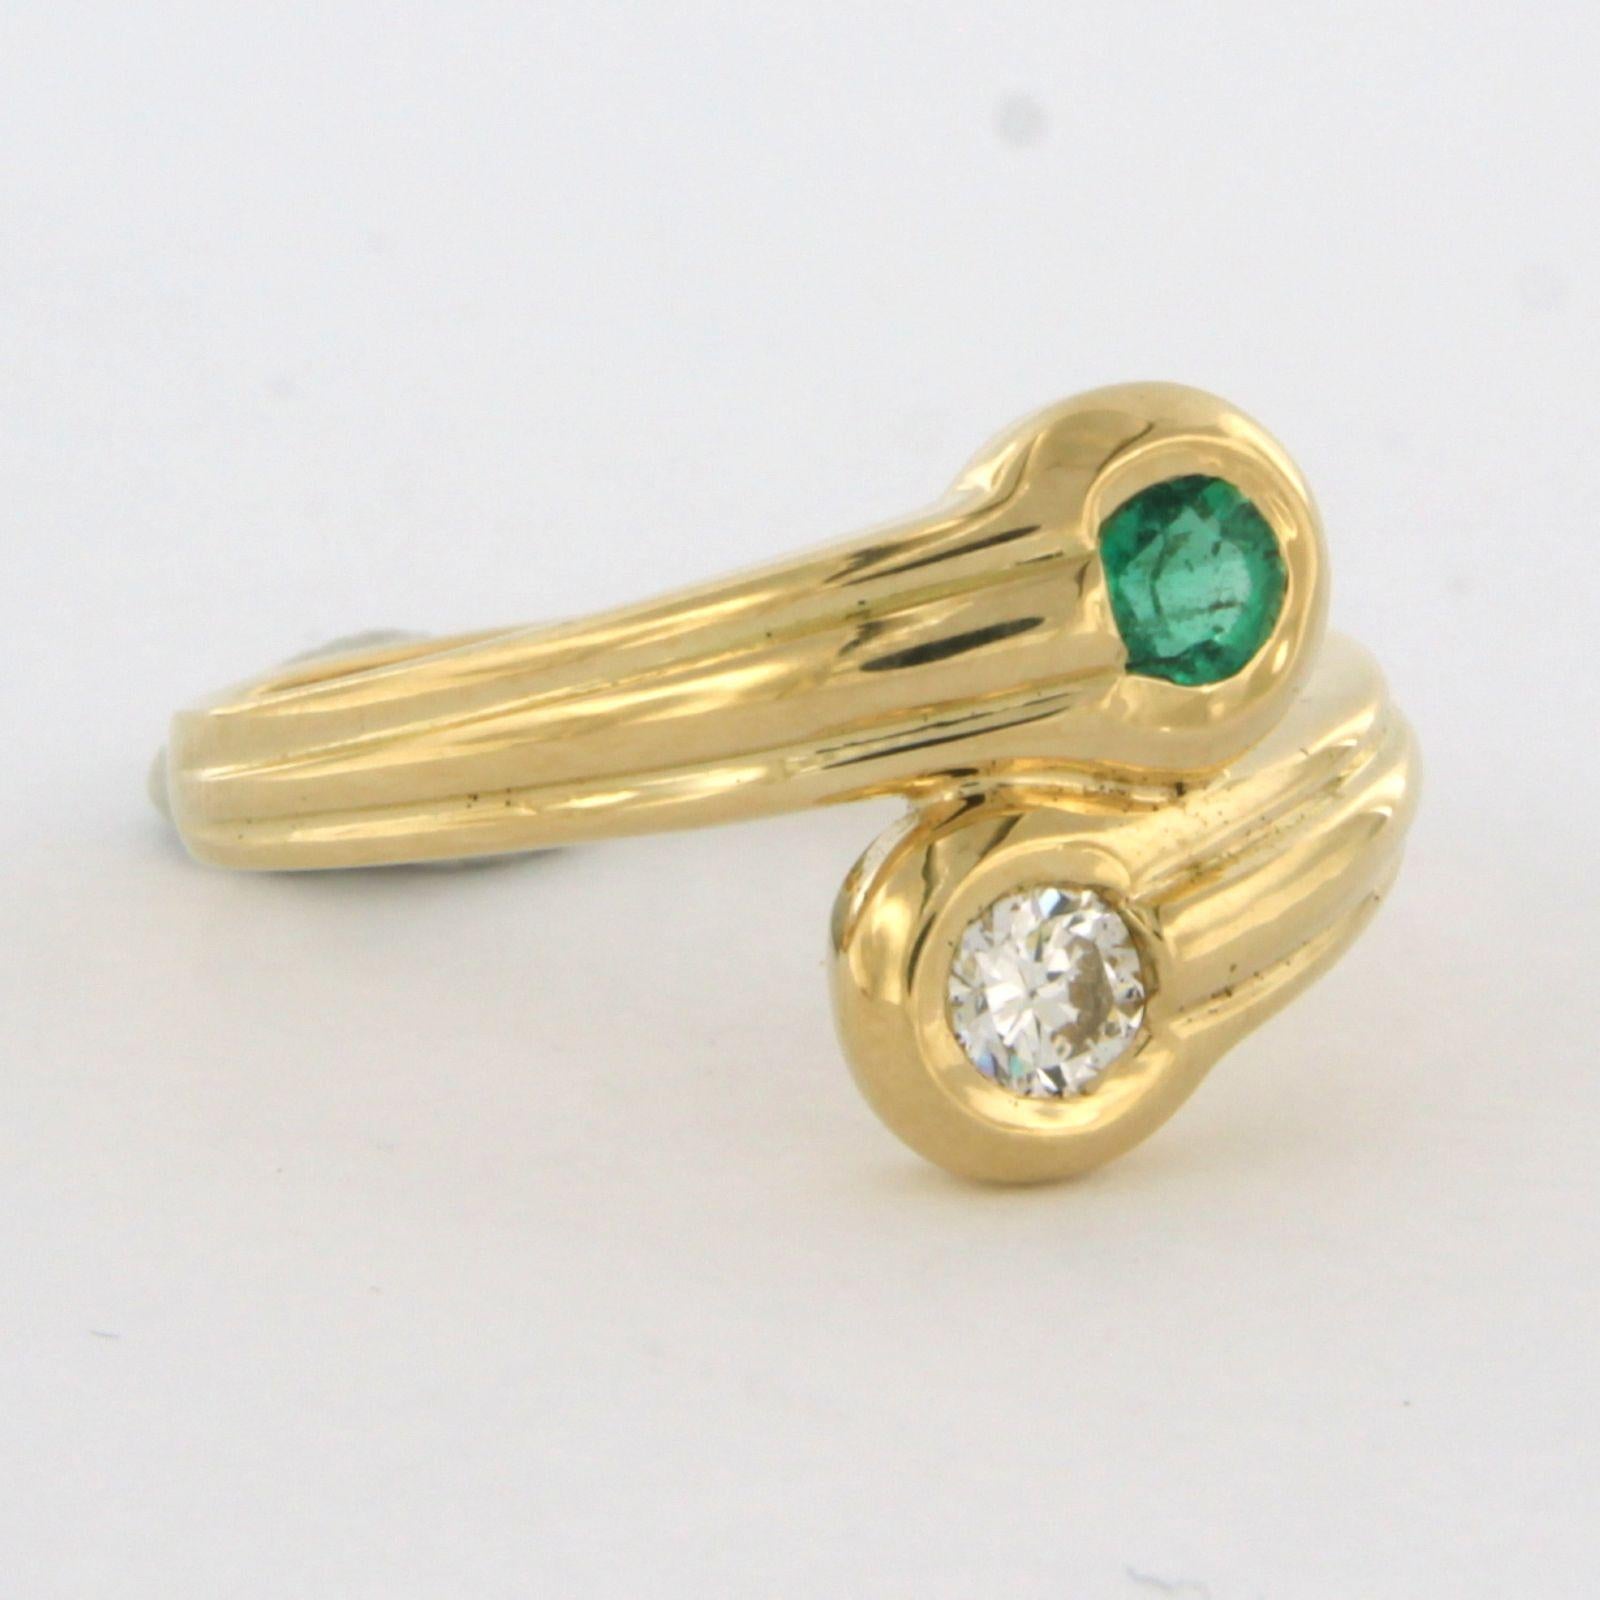 Modern Ring with emerald and diamond 18k yellow gold